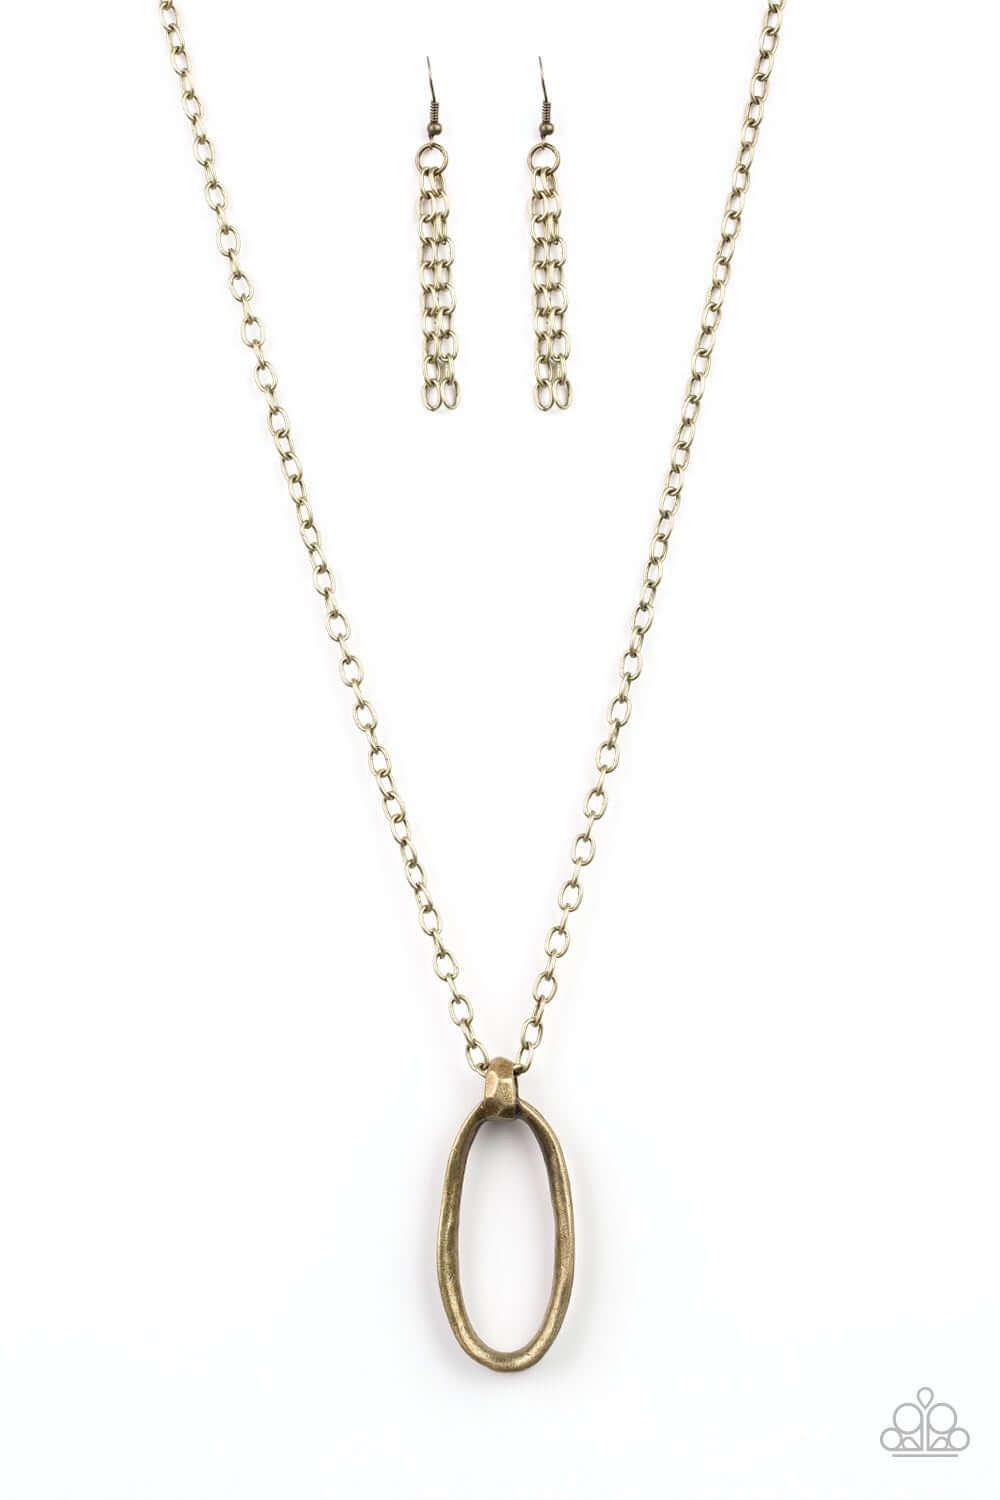 Paparazzi  Accessories - Grit Girl #N748 Peg - Brass Necklace